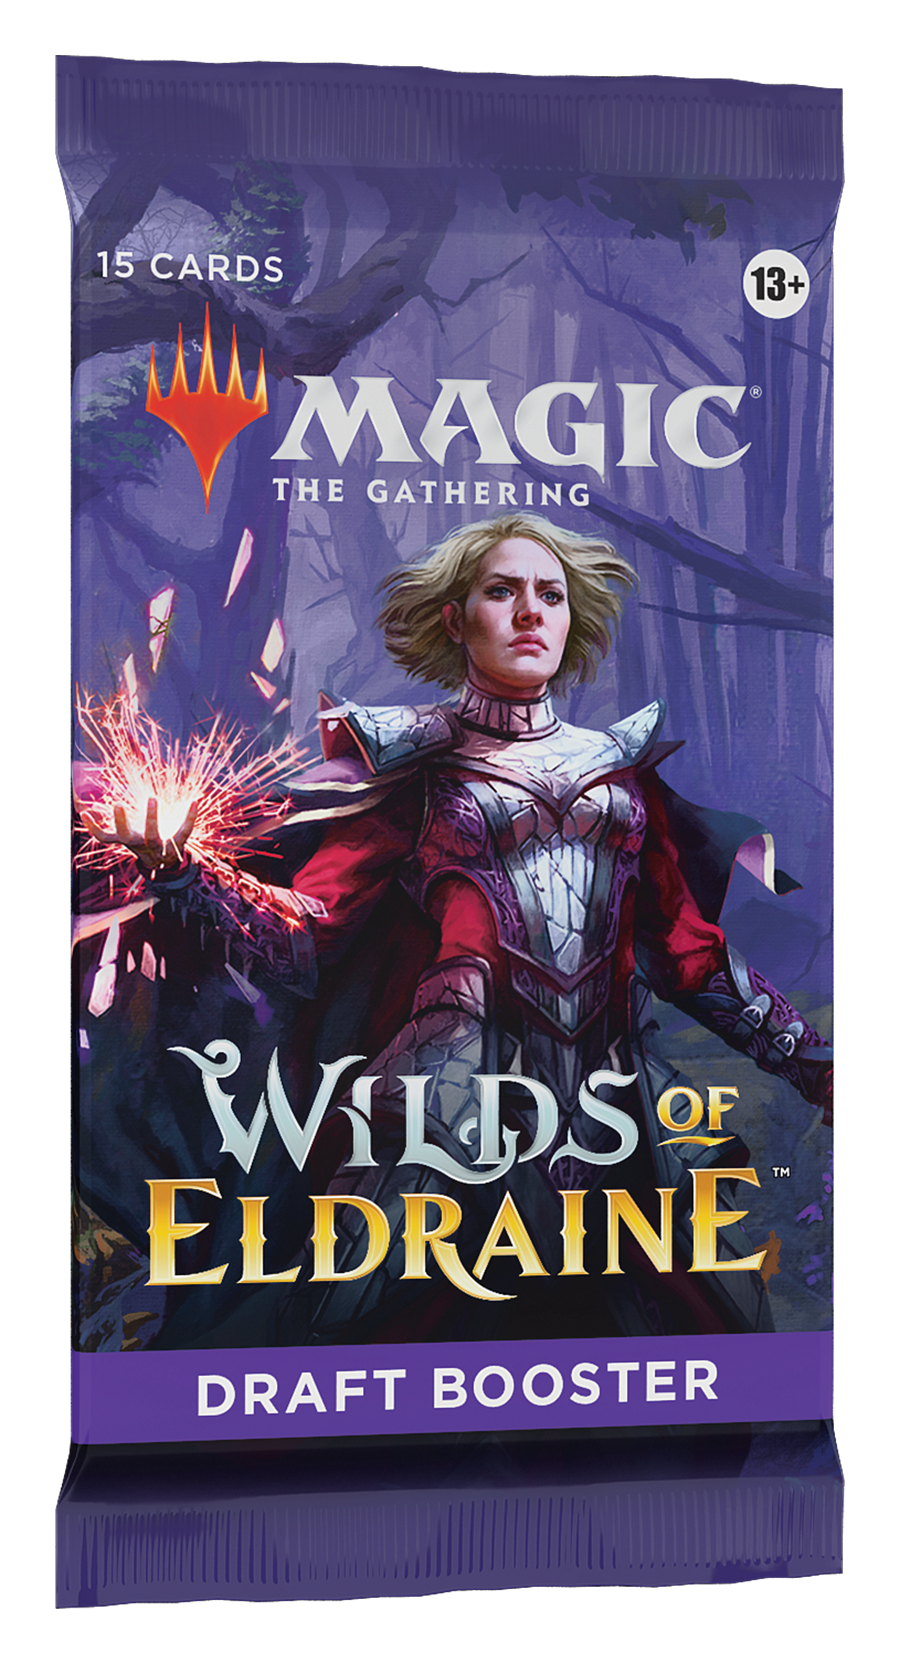 Magic: the Gathering - Wilds of Eldraine Draft Booster